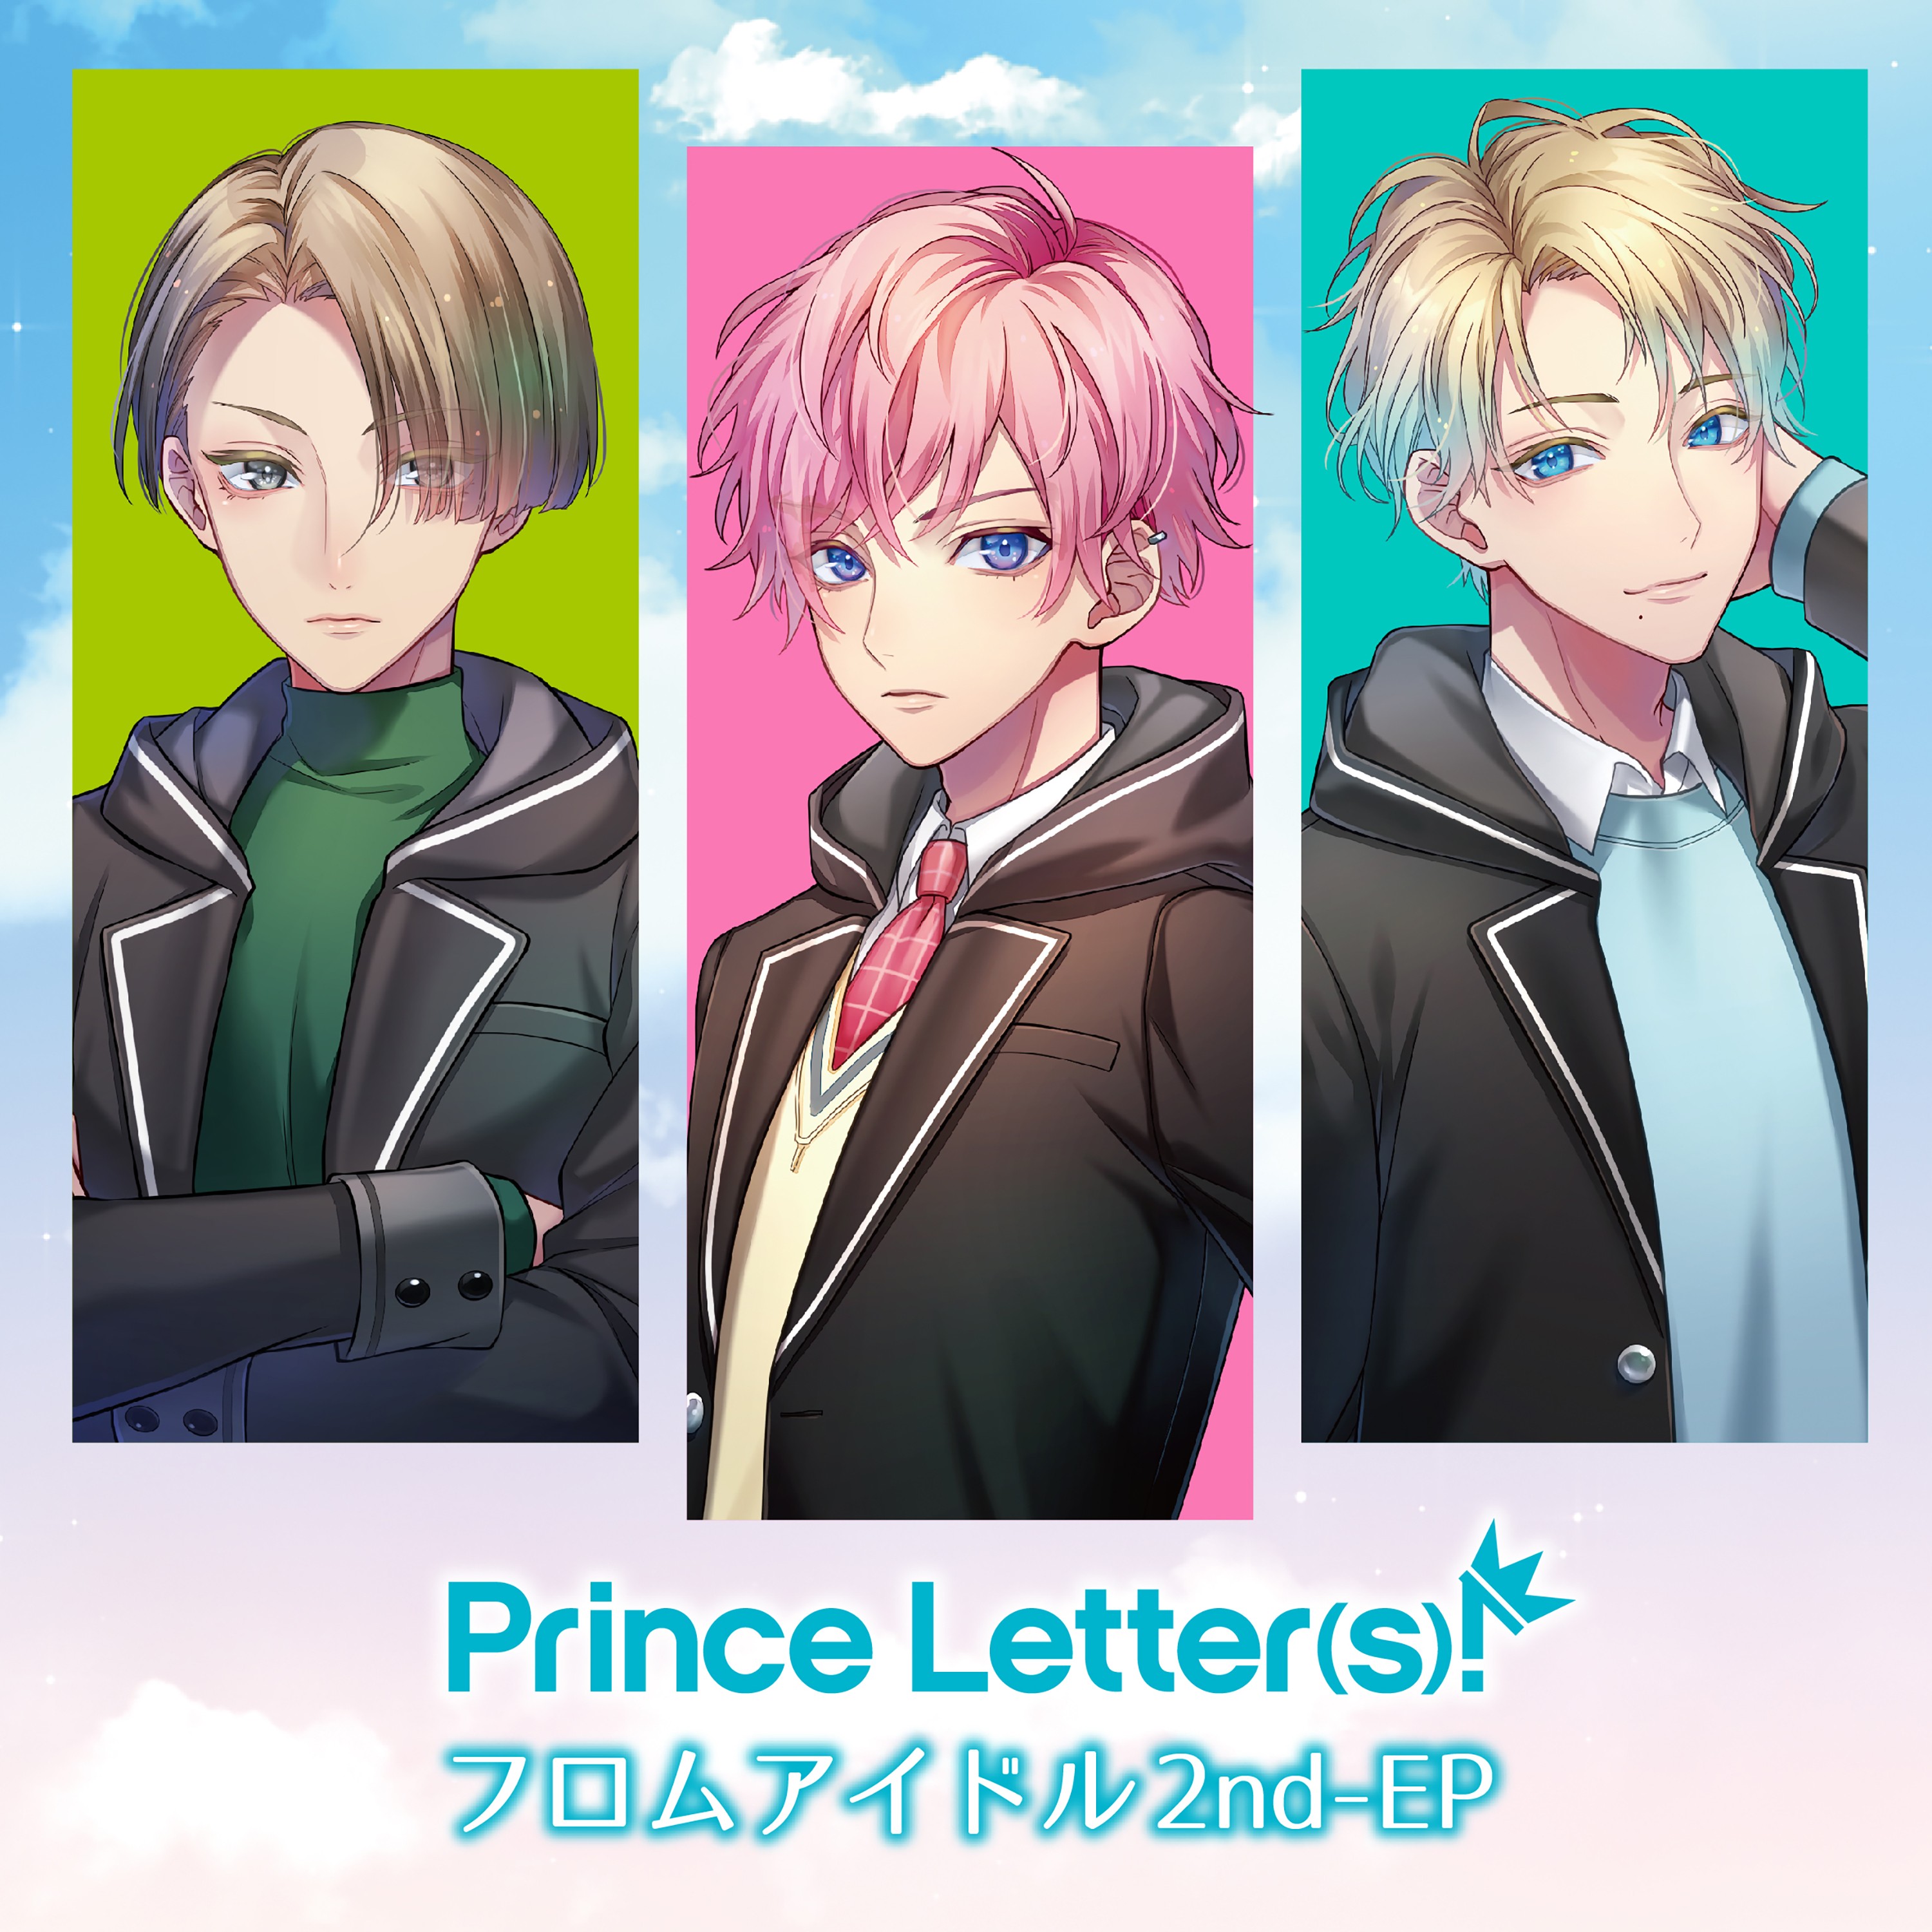 Prince Letter(s)! フロムアイドル 2nd-EP